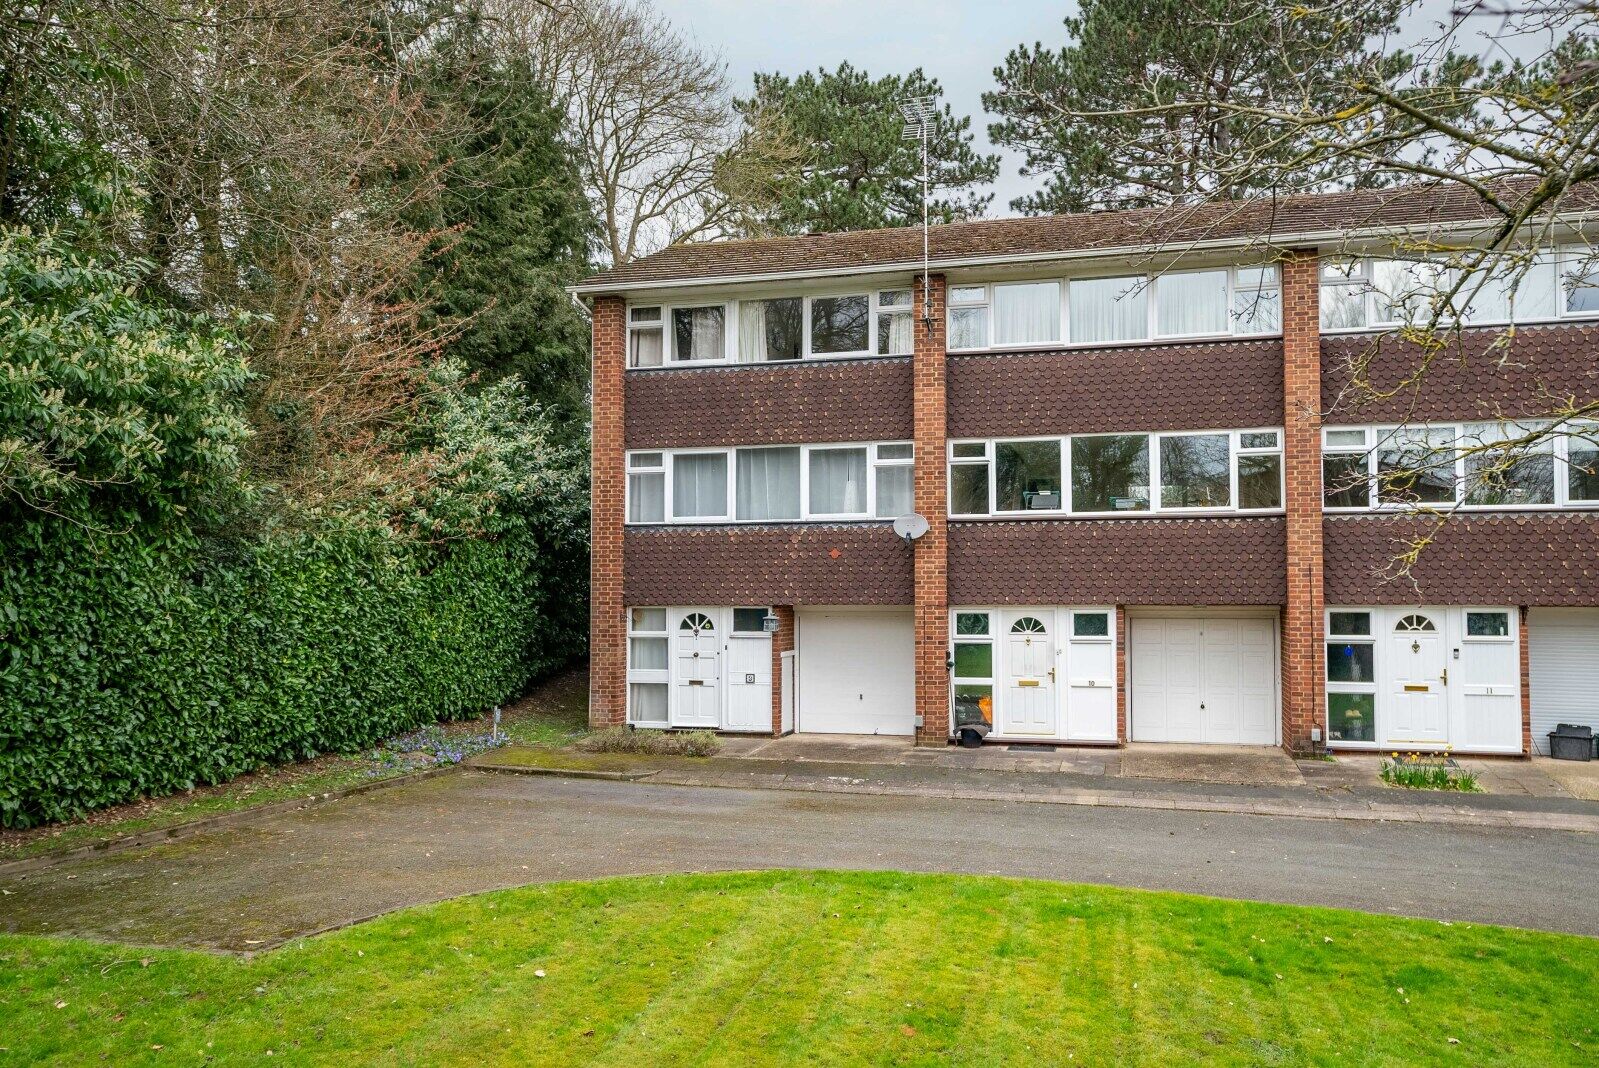 3 bedroom end terraced house for sale Old Rectory Close, Harpenden, AL5, main image